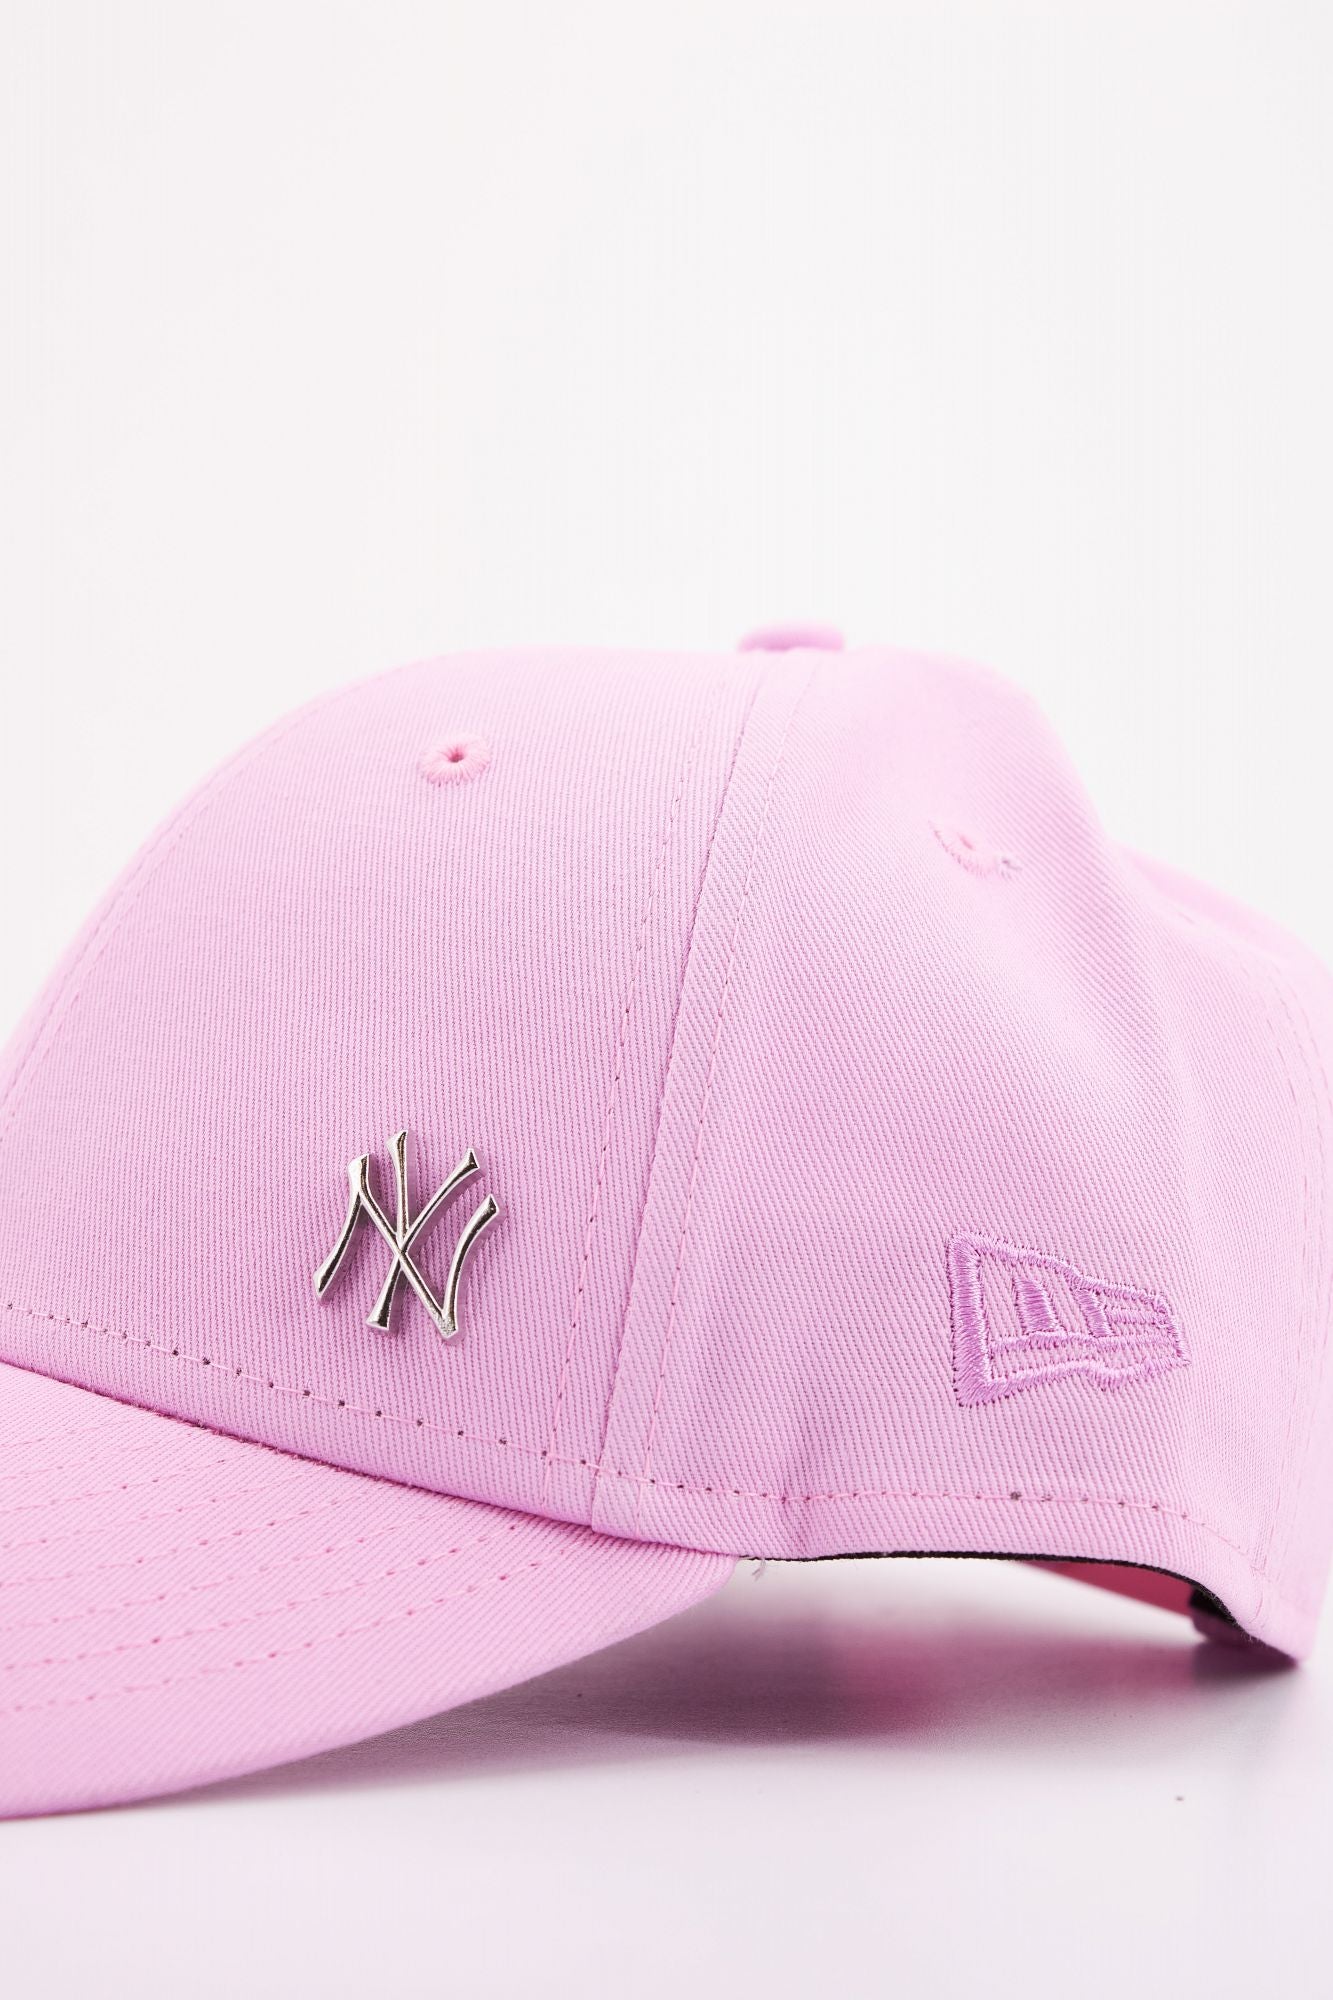 NEW ERA FLAWLESS 9FORTY en color ROSA (4)